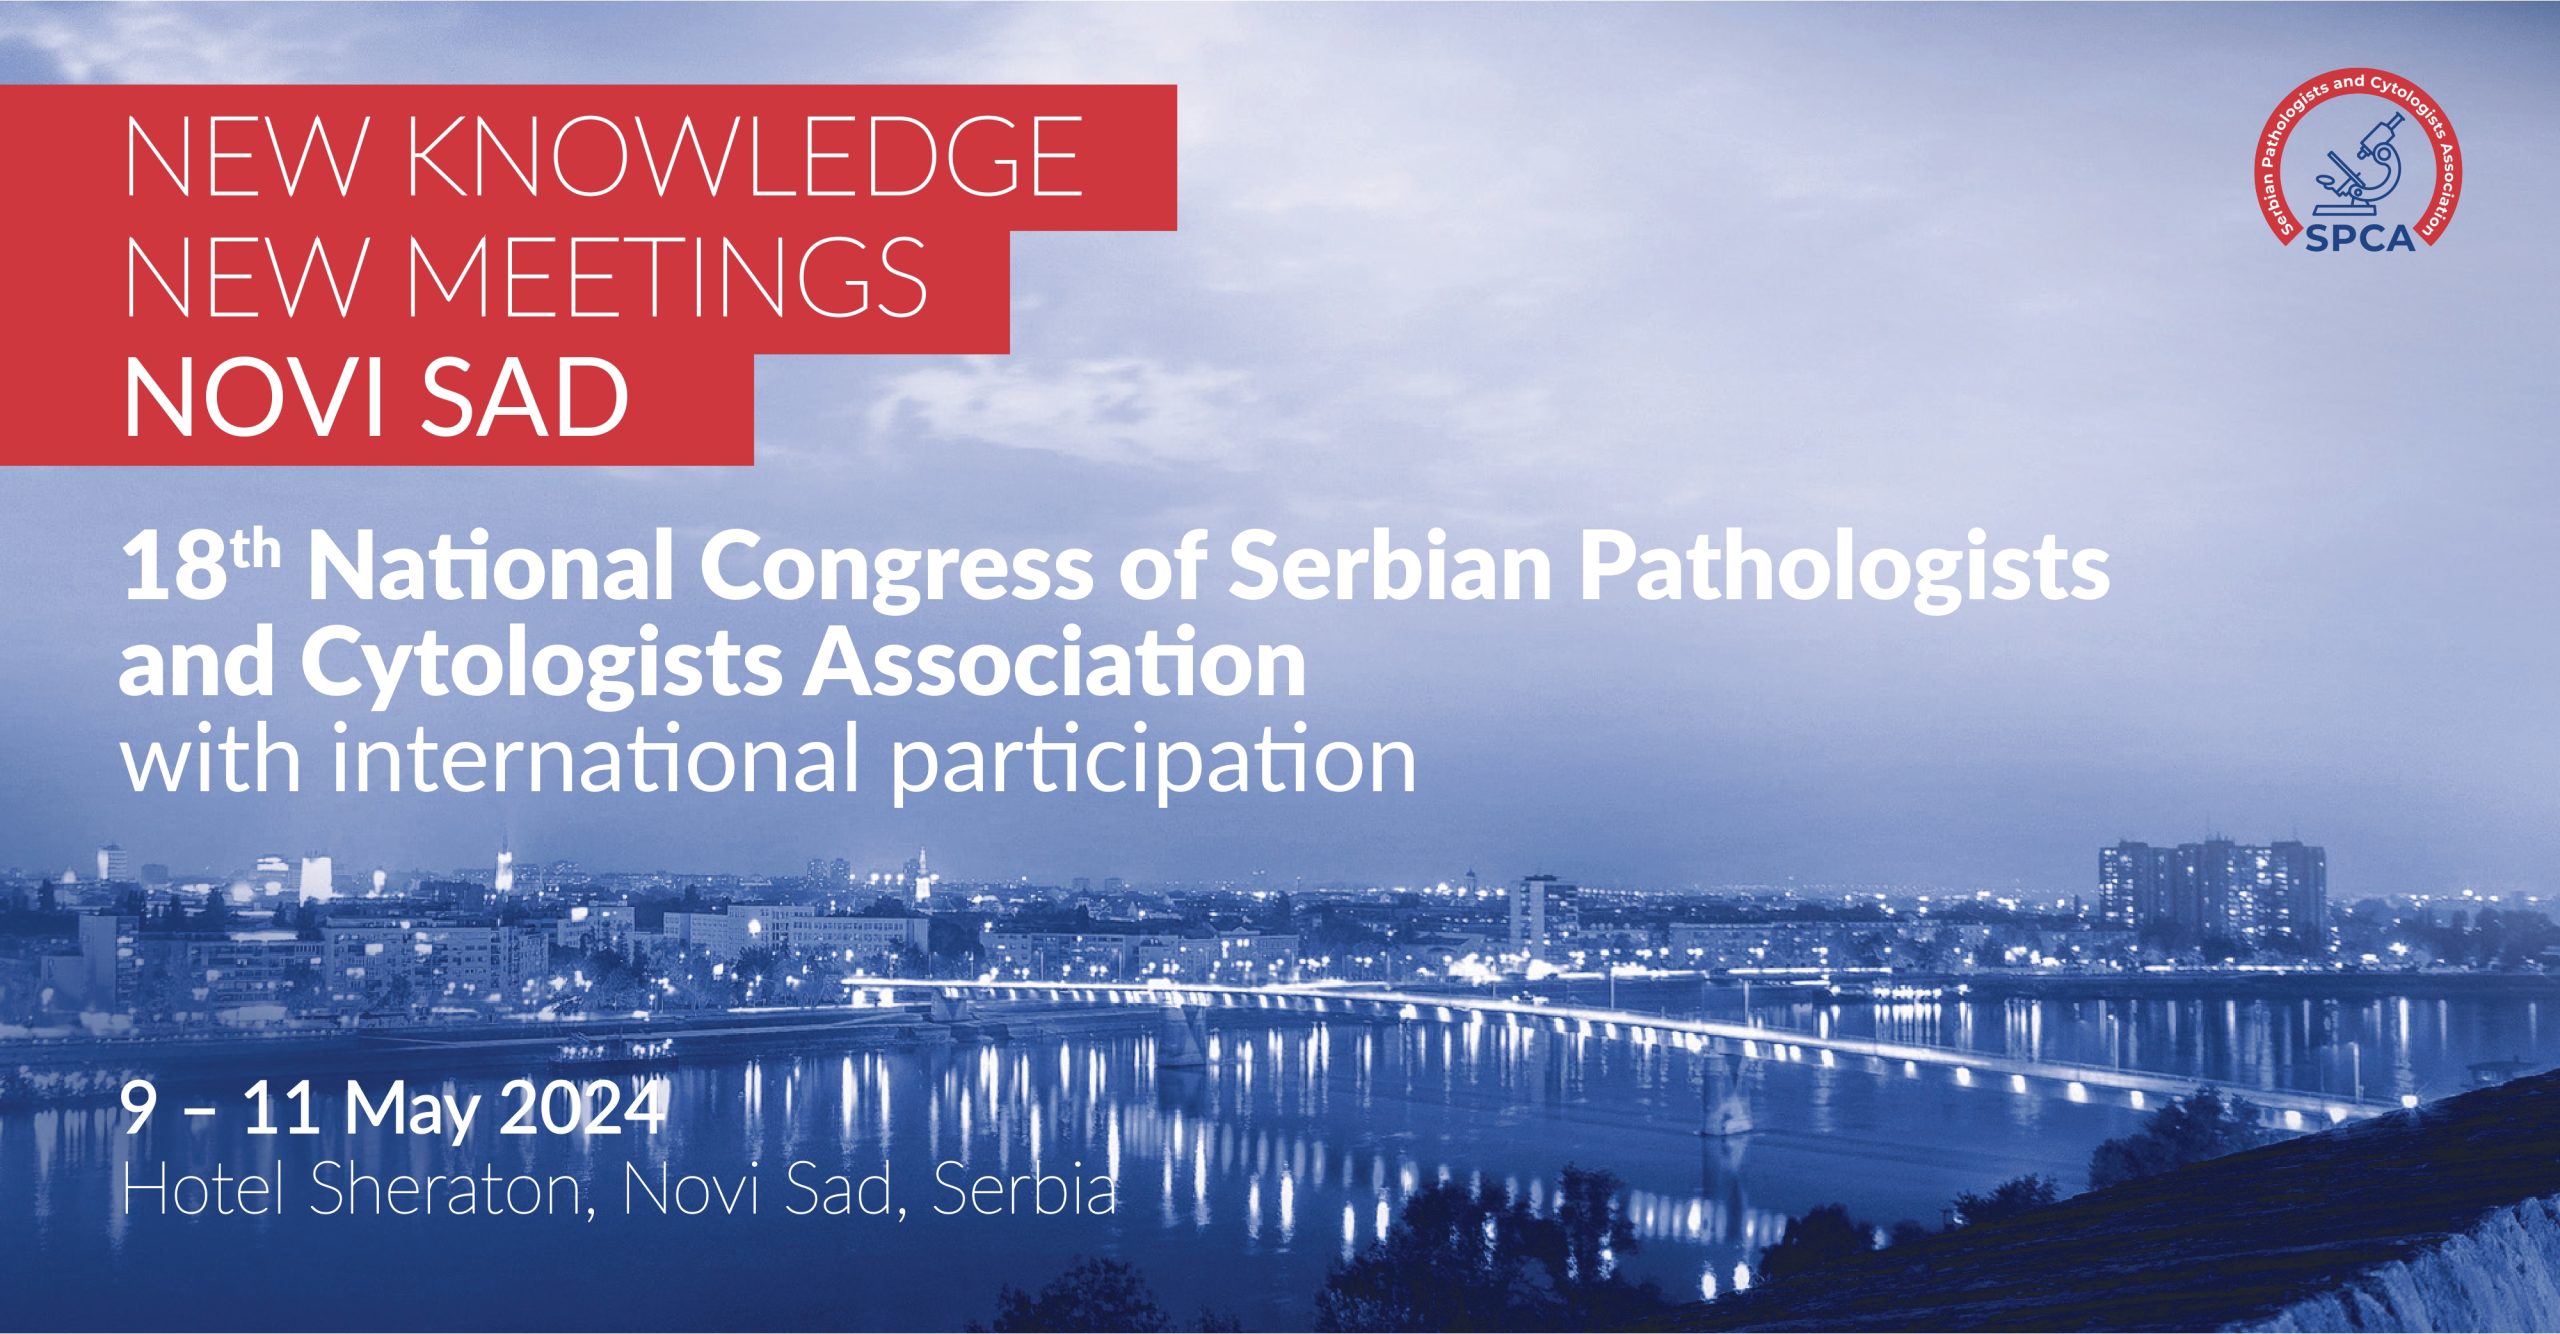 18th National Congress of Serbian Pathologists and Cytologists with international participation, MAY 2024